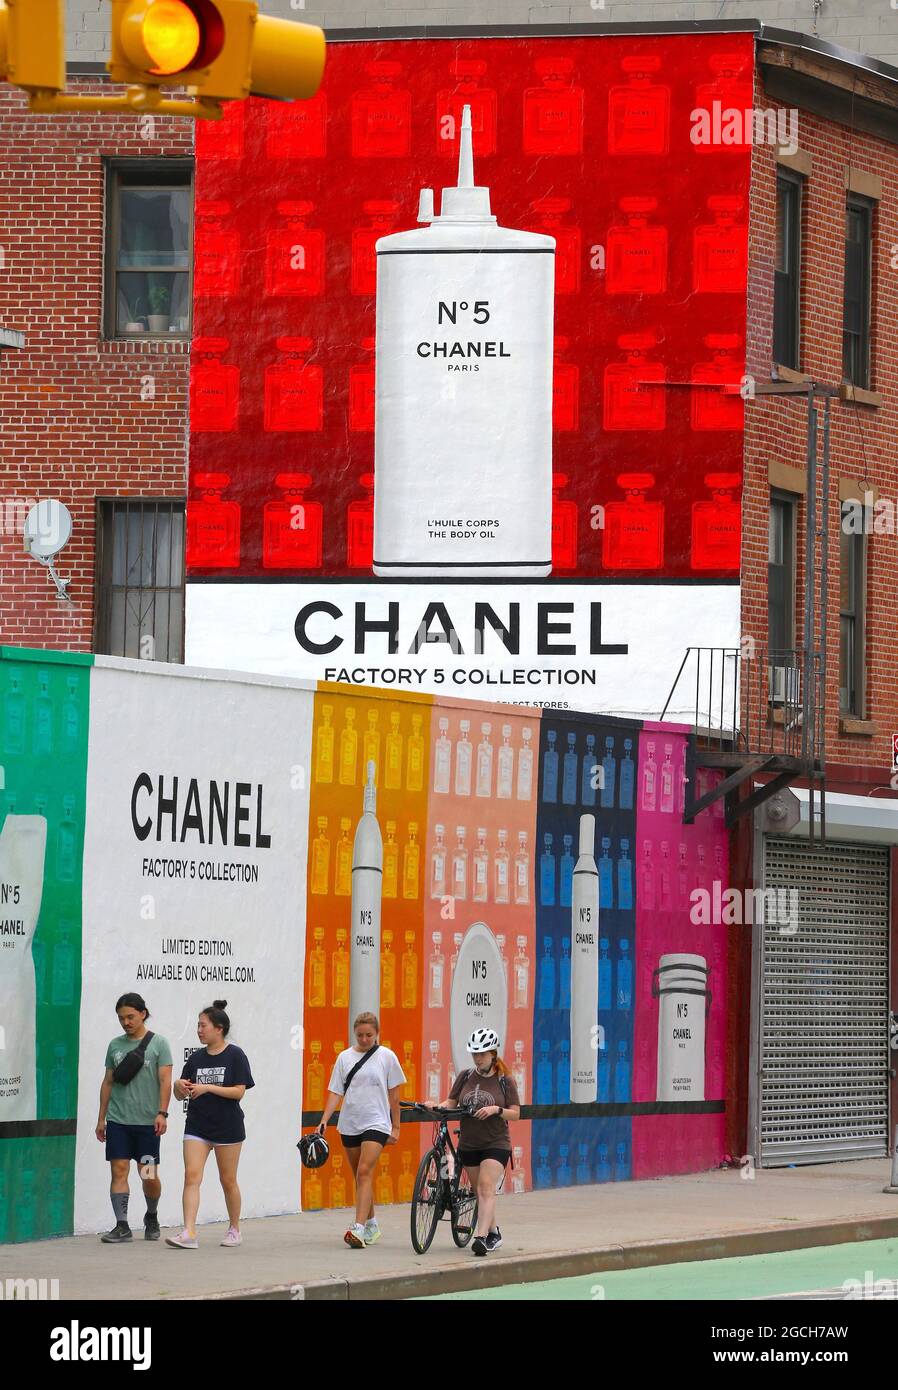 Chanel Factory 5 Colllection advertising handmade mural by Overall